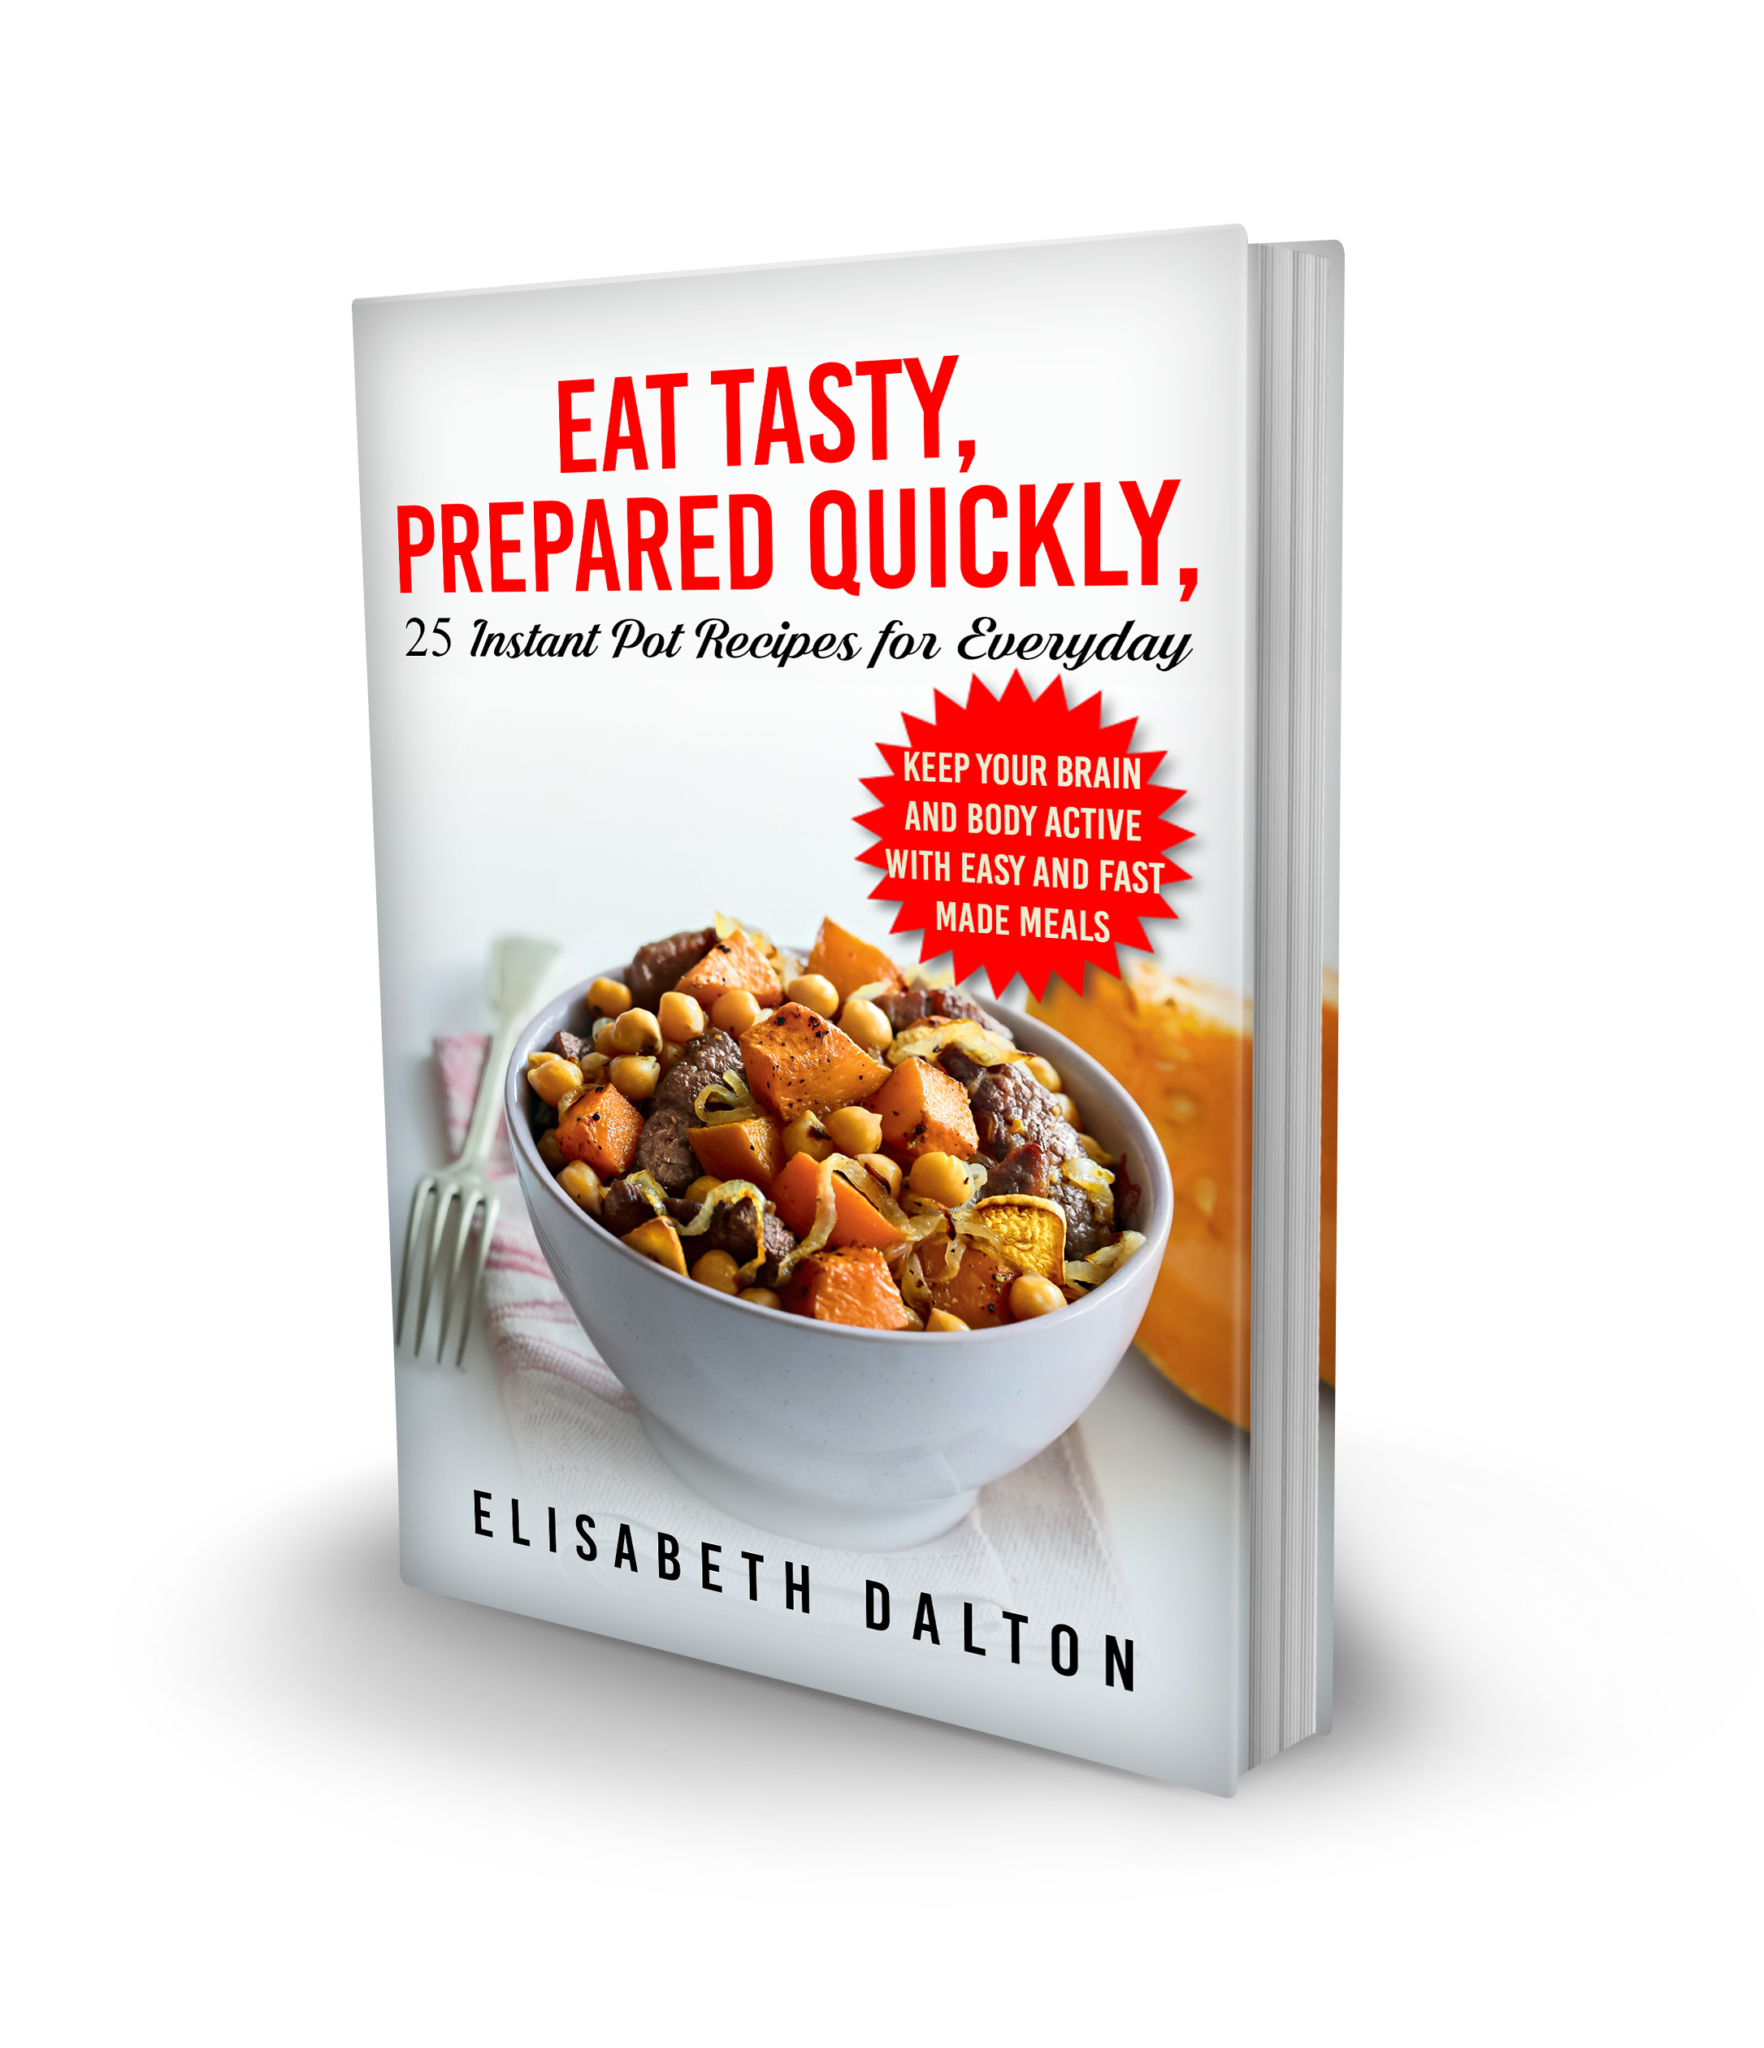 FREE: Eat Tasty, Prepared Quickly: 25 Instant Pot Recipes for Everyday by Elisabeth Dalton